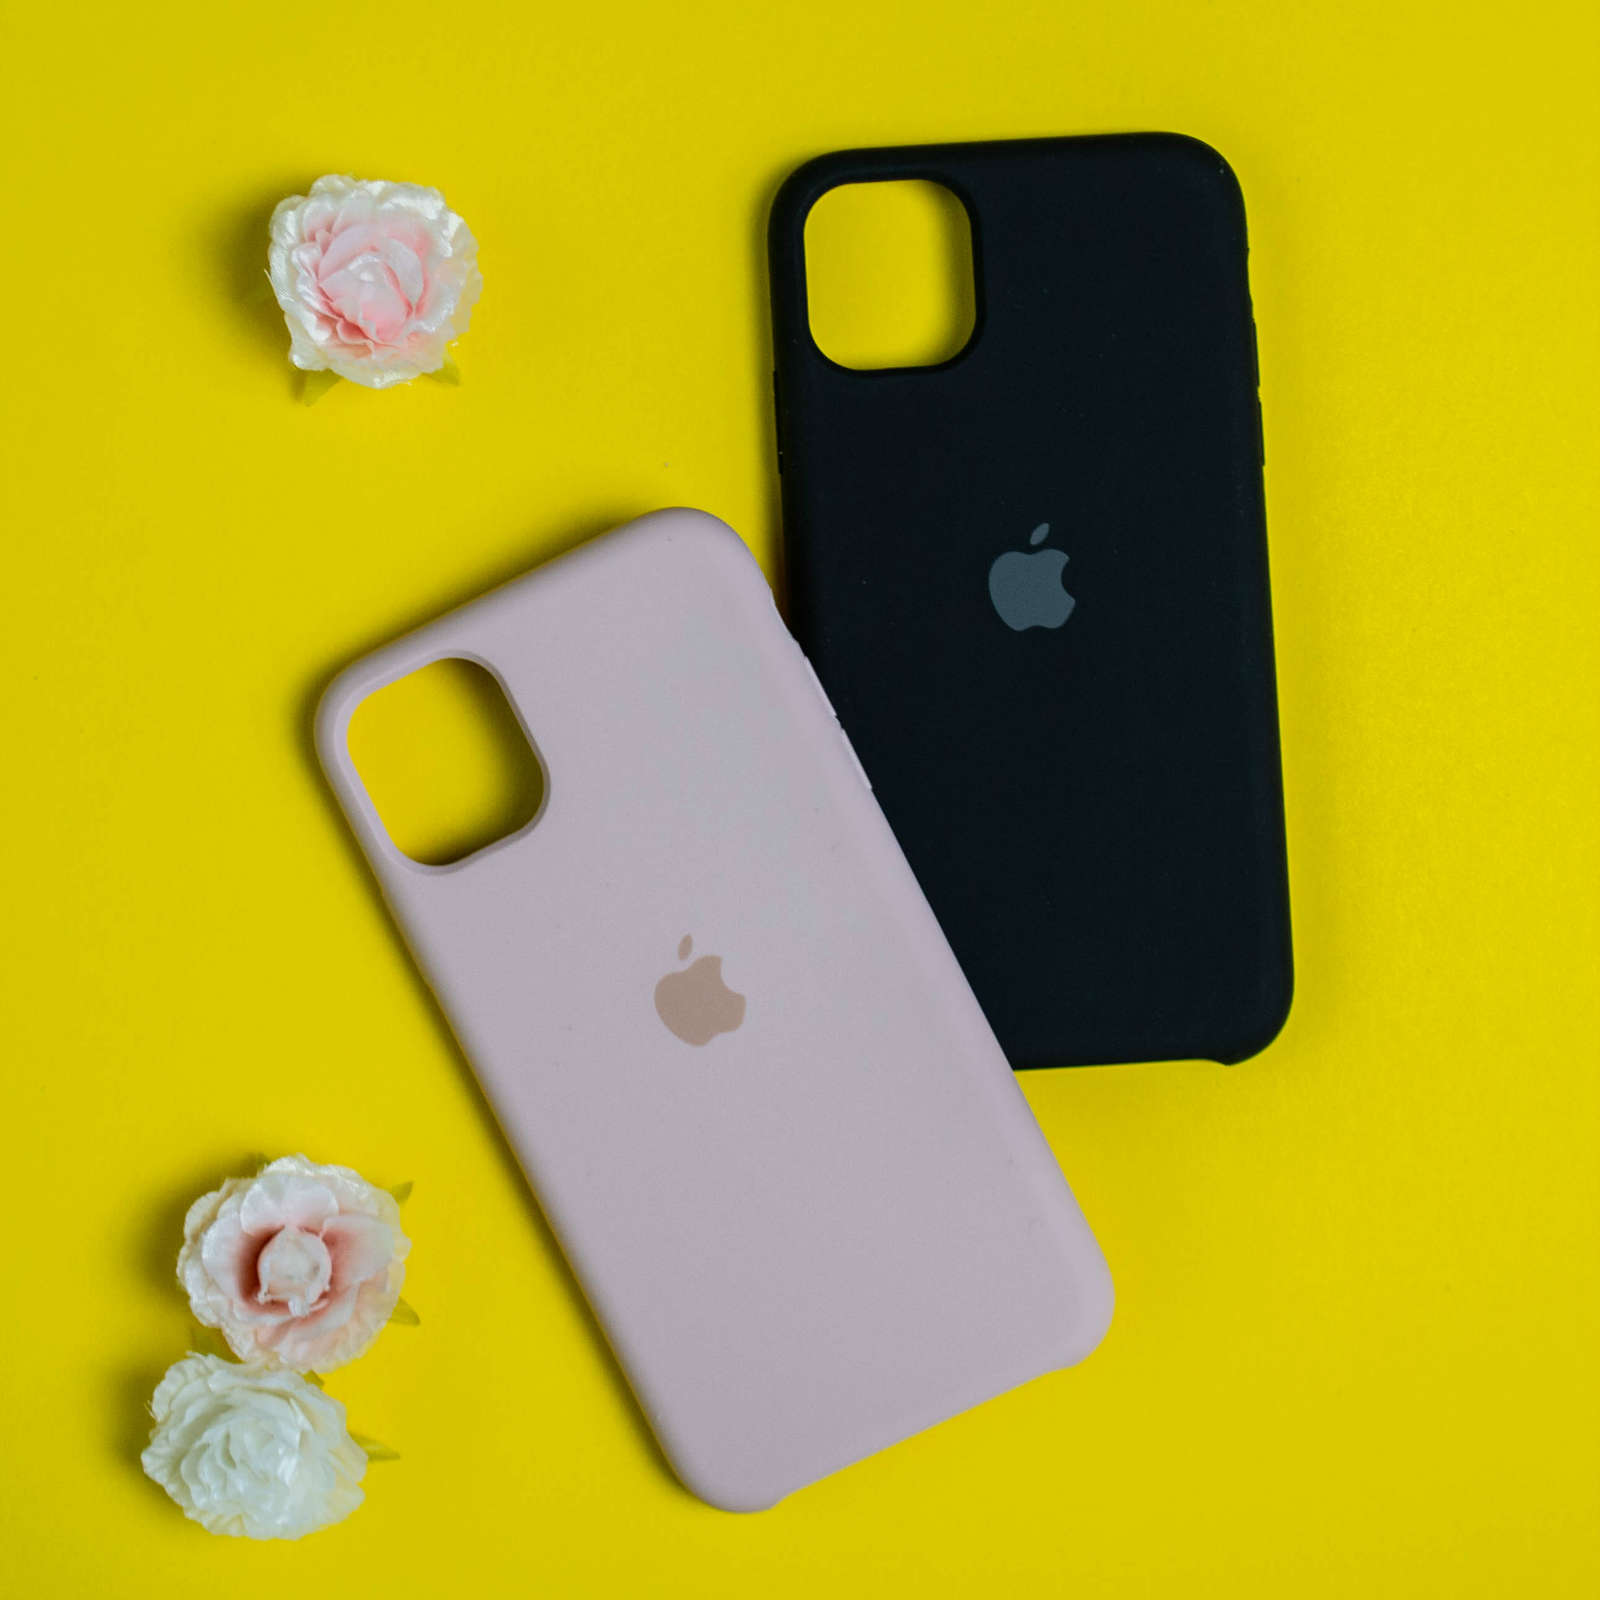 Iphone 12 Iphone 11 Colors Yellow